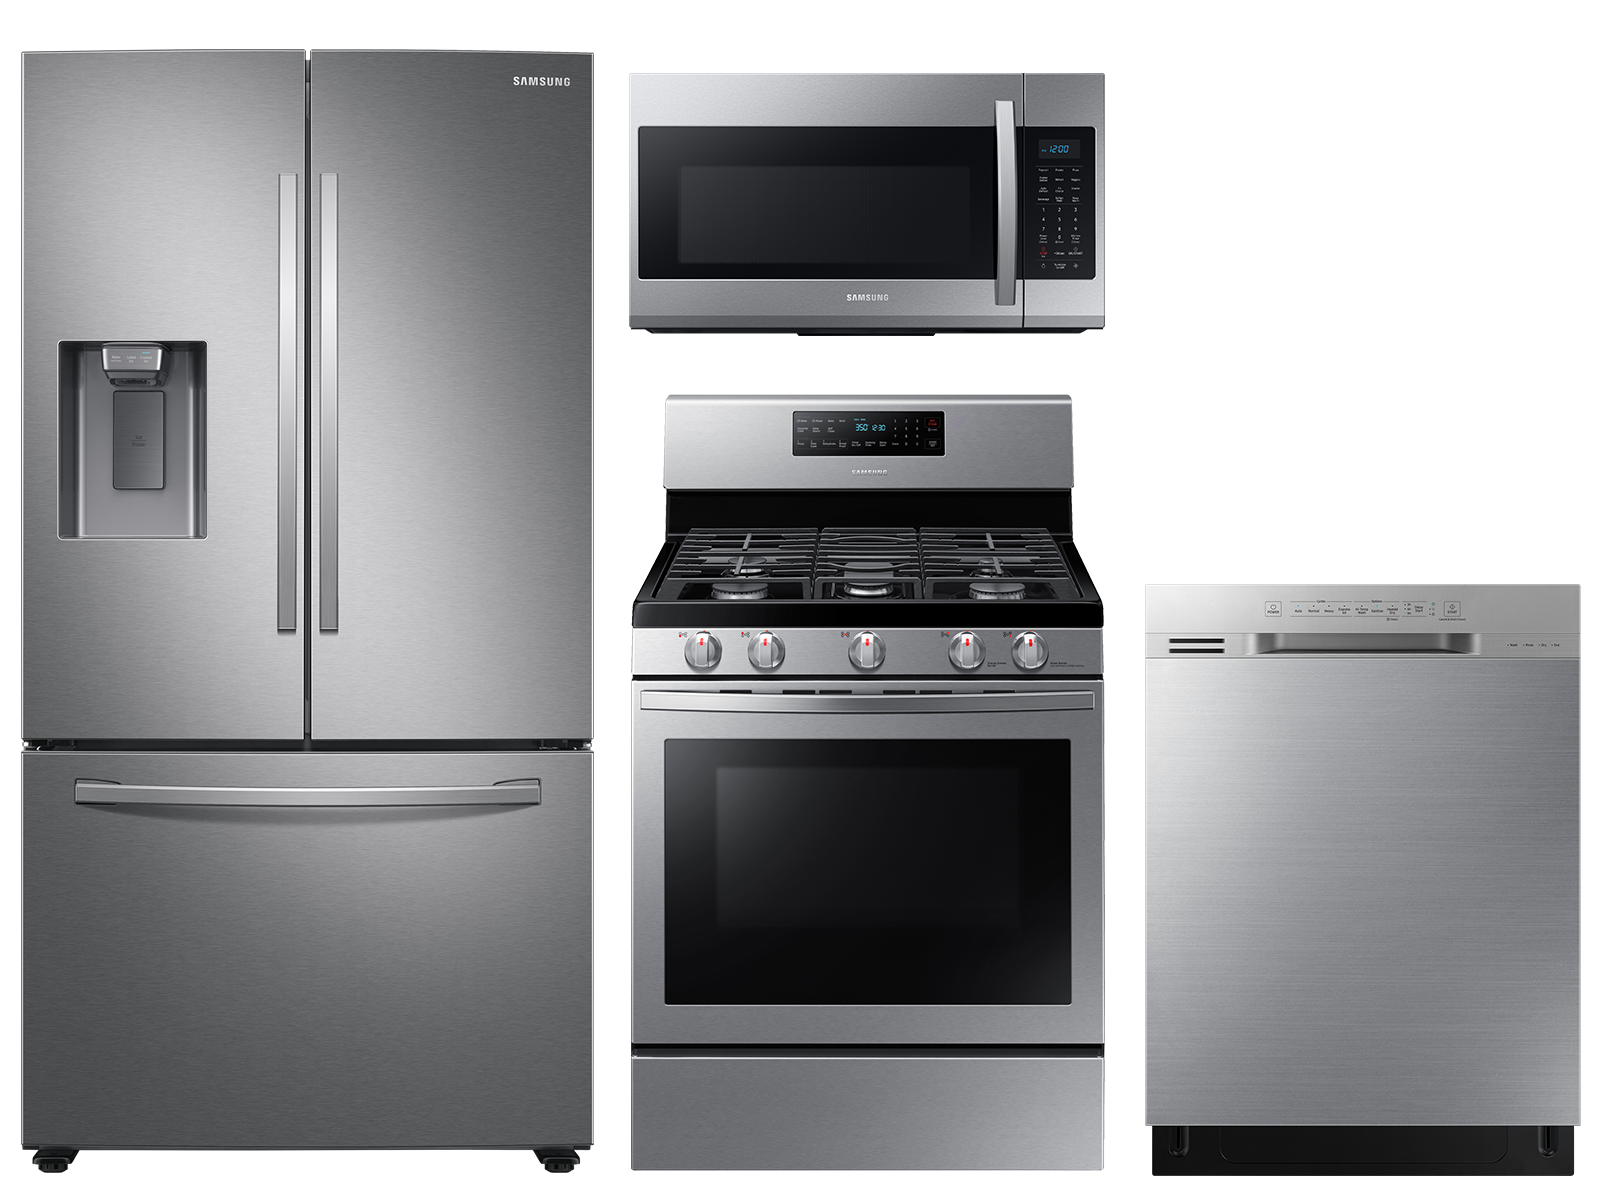 Large capacity 3-door refrigerator & gas range package in stainless stainless